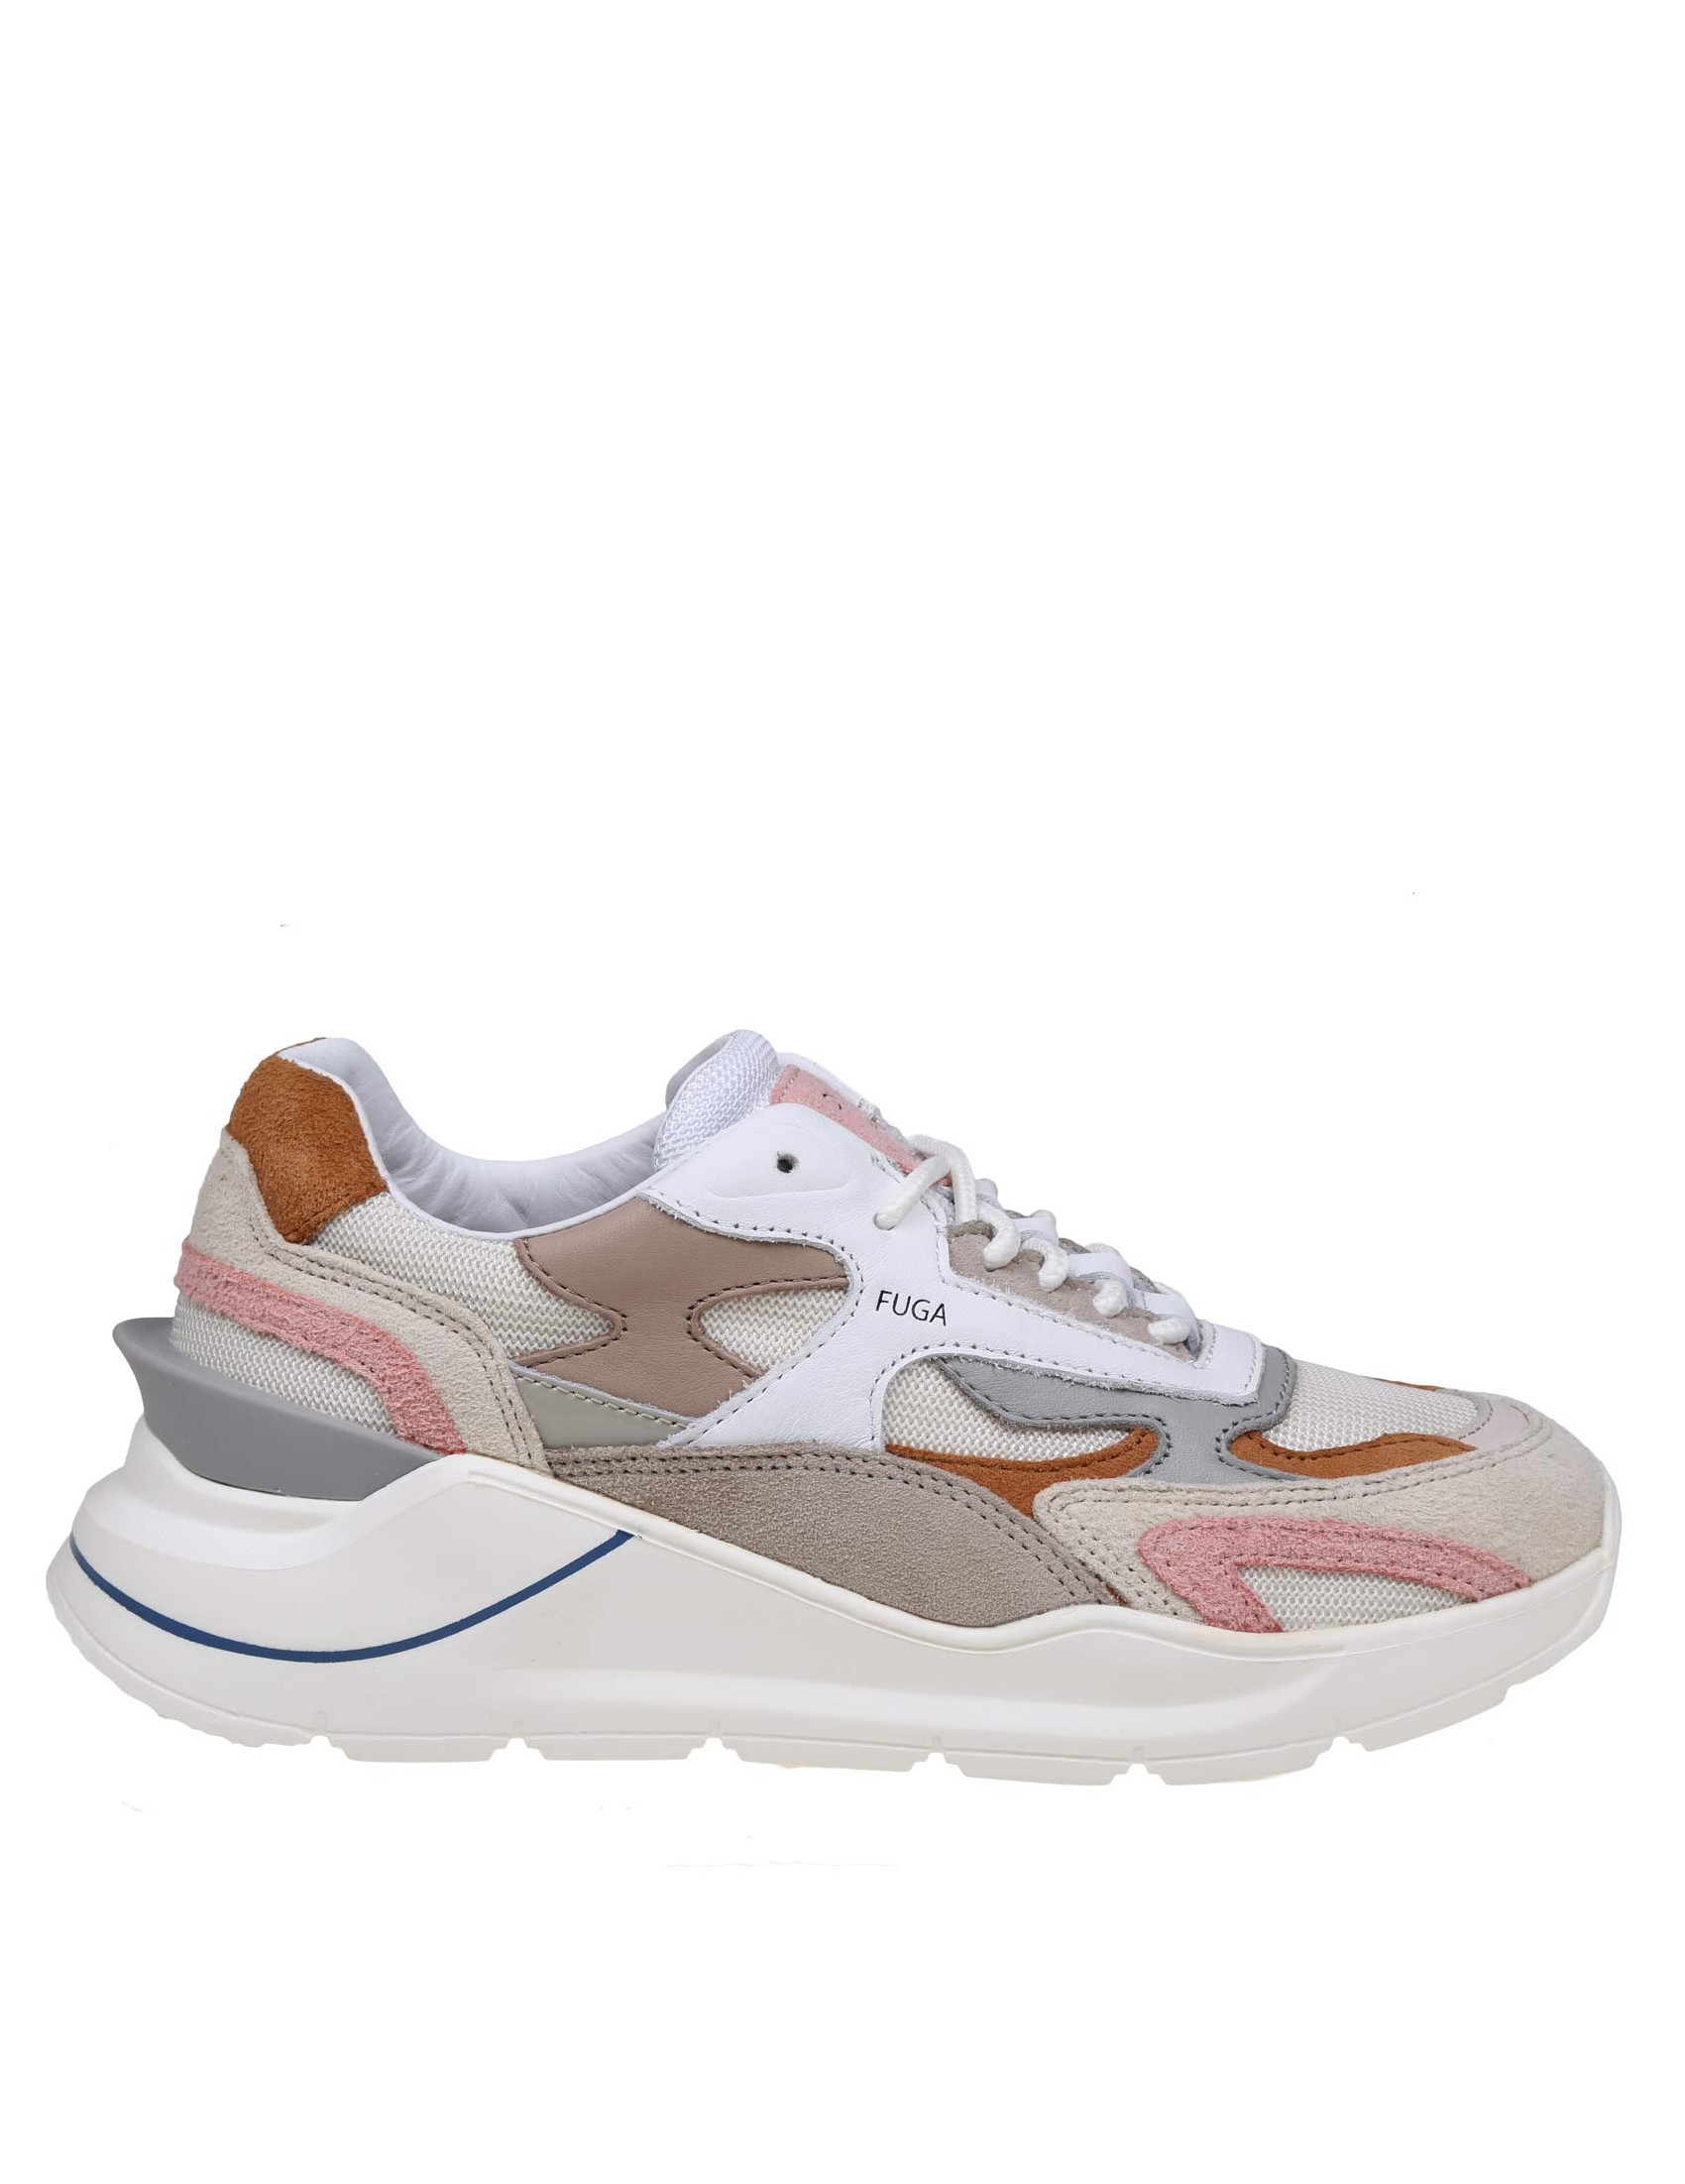 D.A.T.E. FUGA SNEAKERS IN WHITE/ CREAM LEATHER AND SUEDE